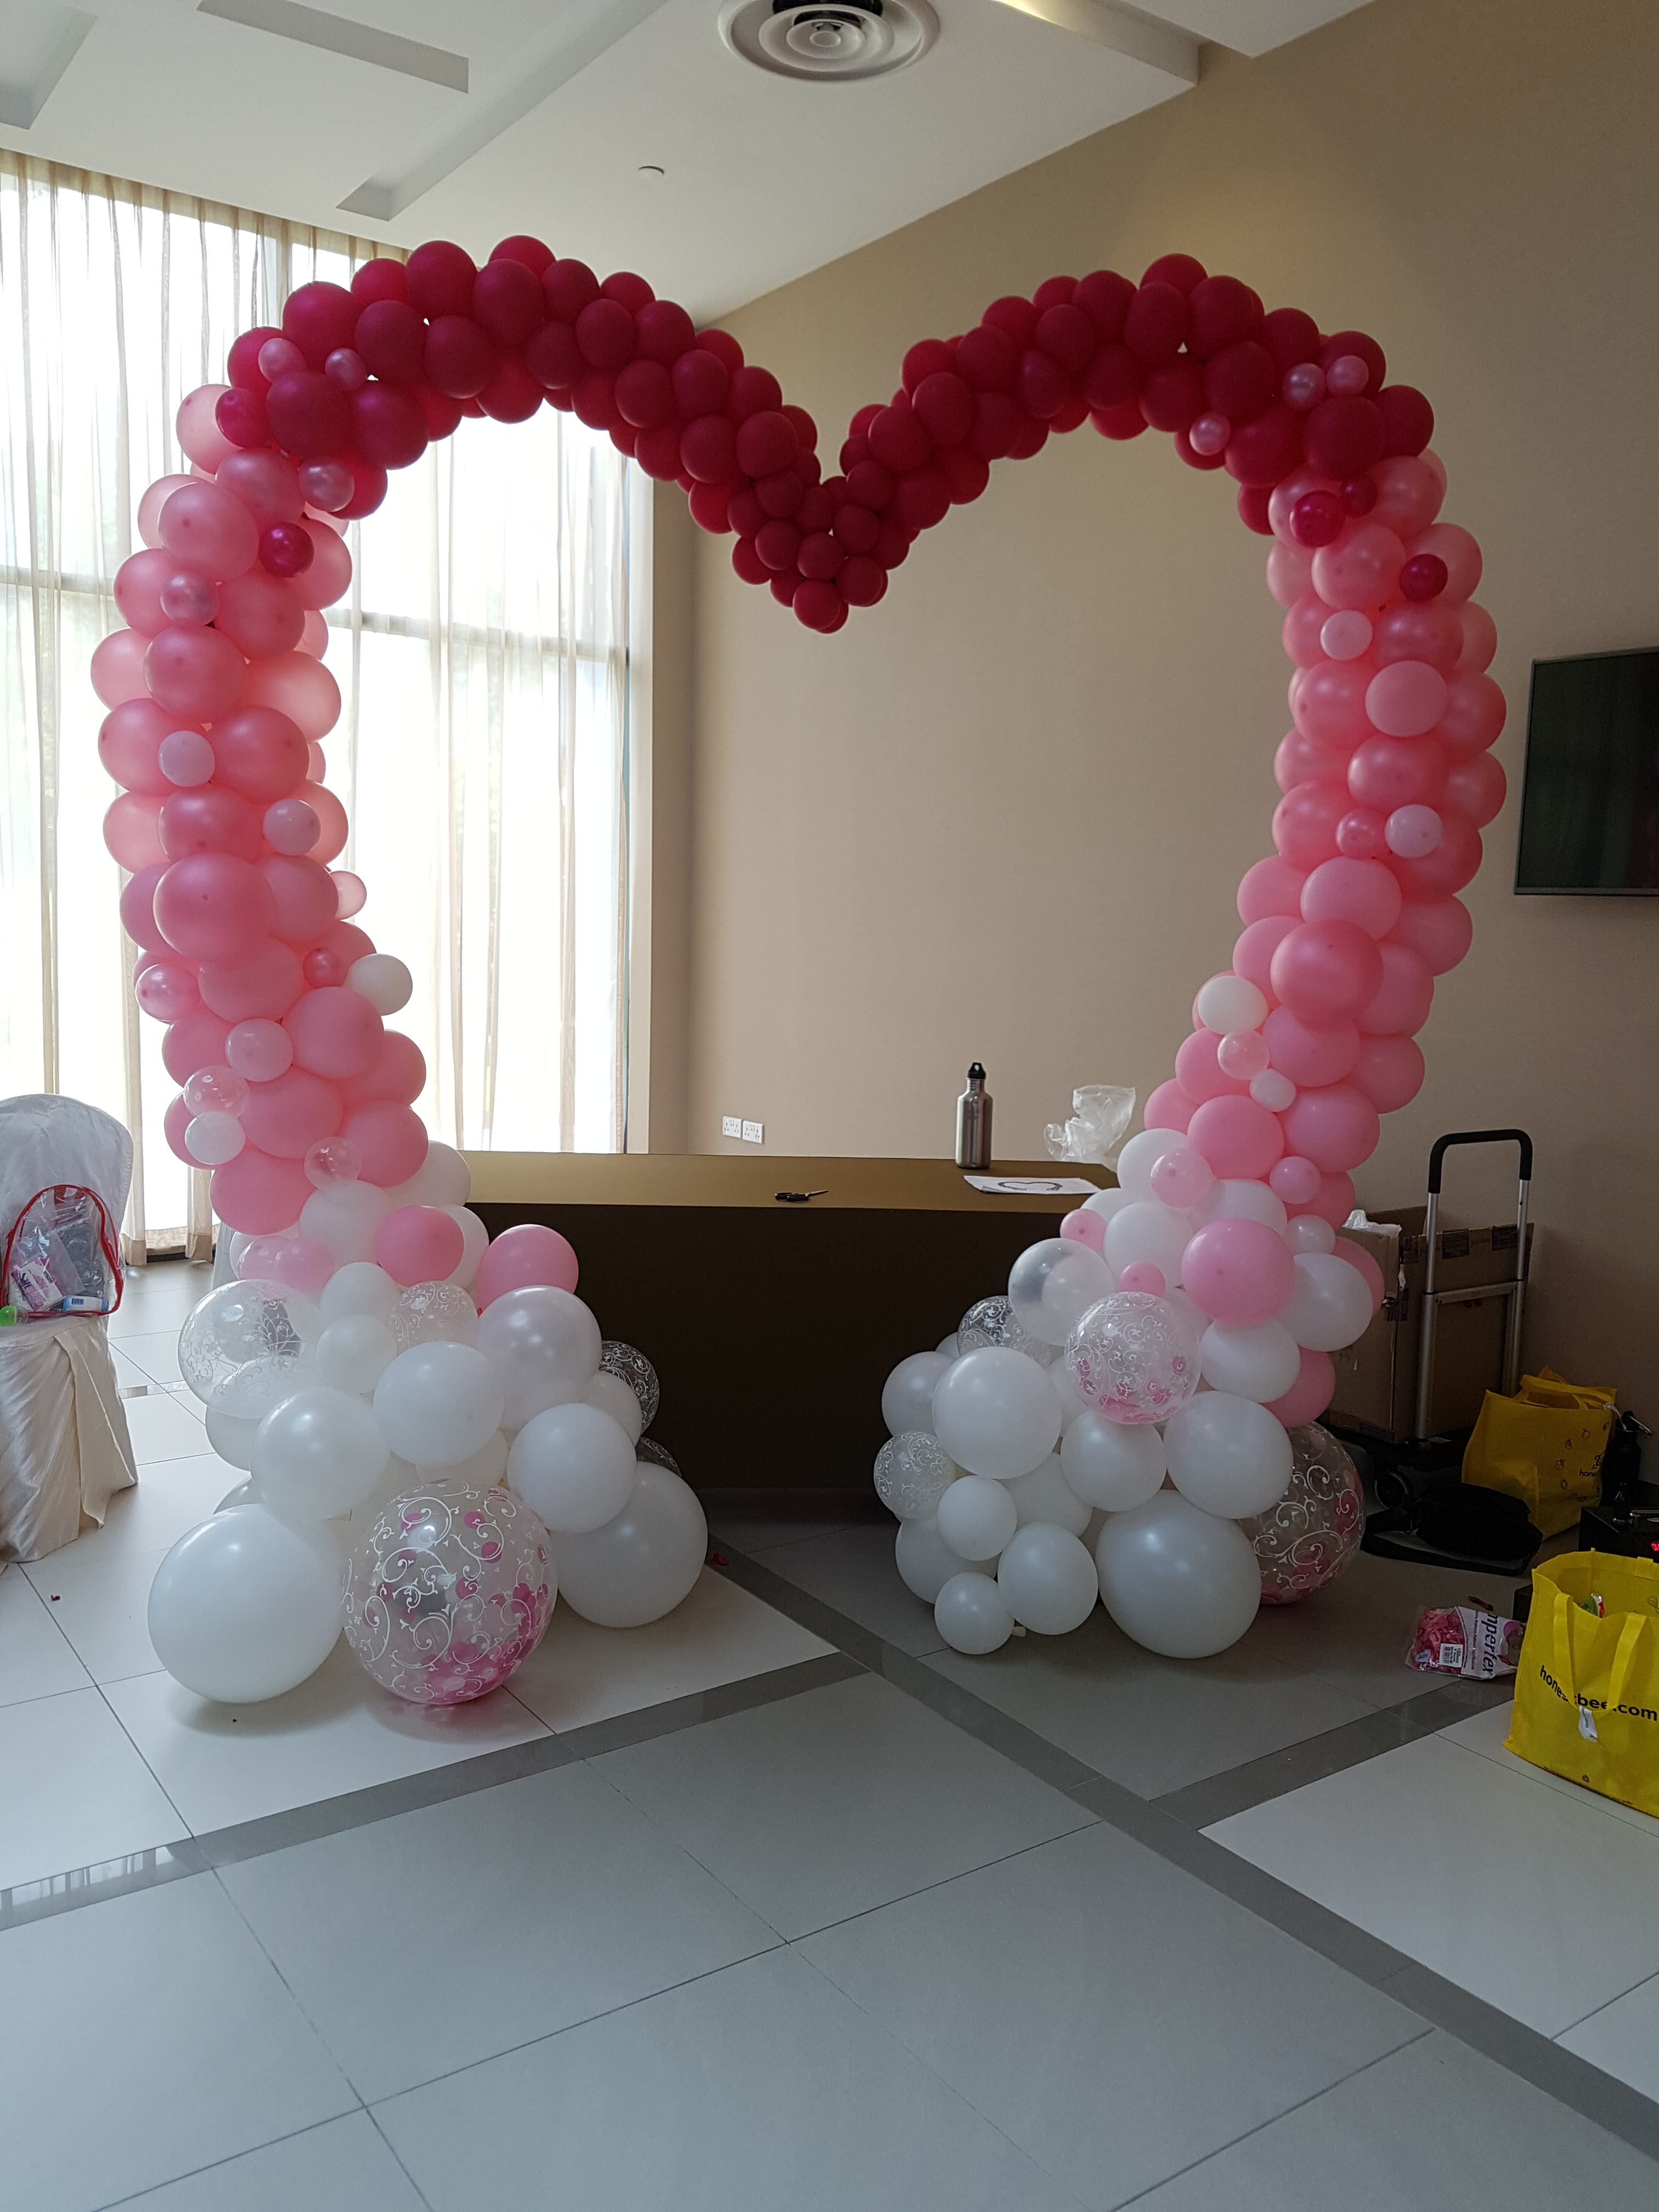 , Heart Shaped balloon arch for weddings and events!, Singapore Balloon Decoration Services - Balloon Workshop and Balloon Sculpting